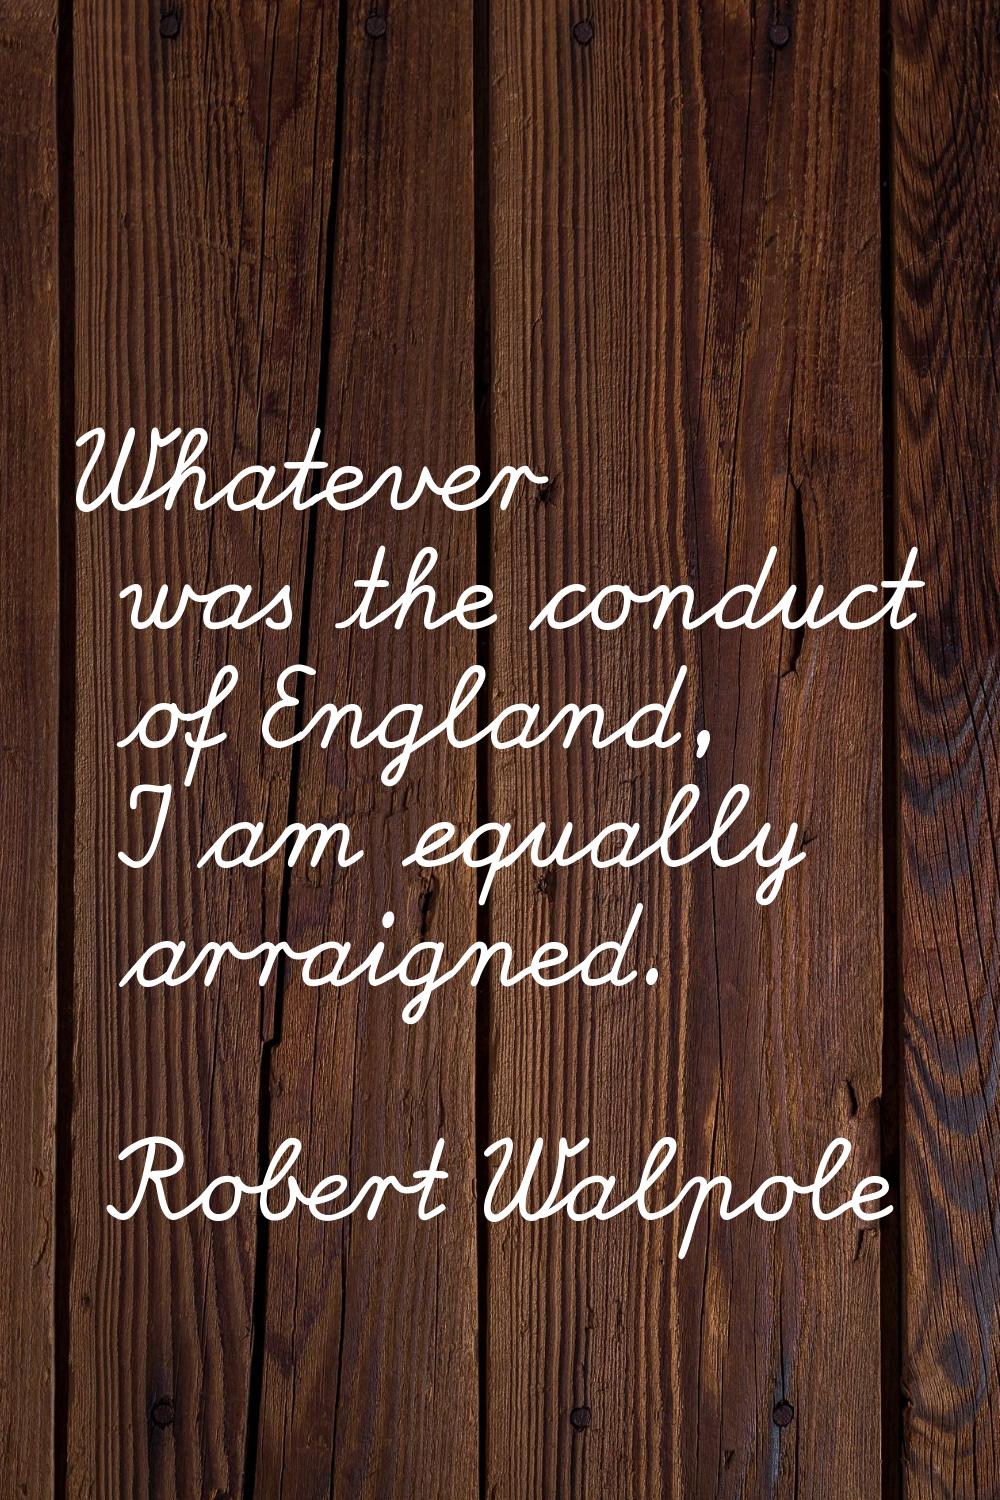 Whatever was the conduct of England, I am equally arraigned.